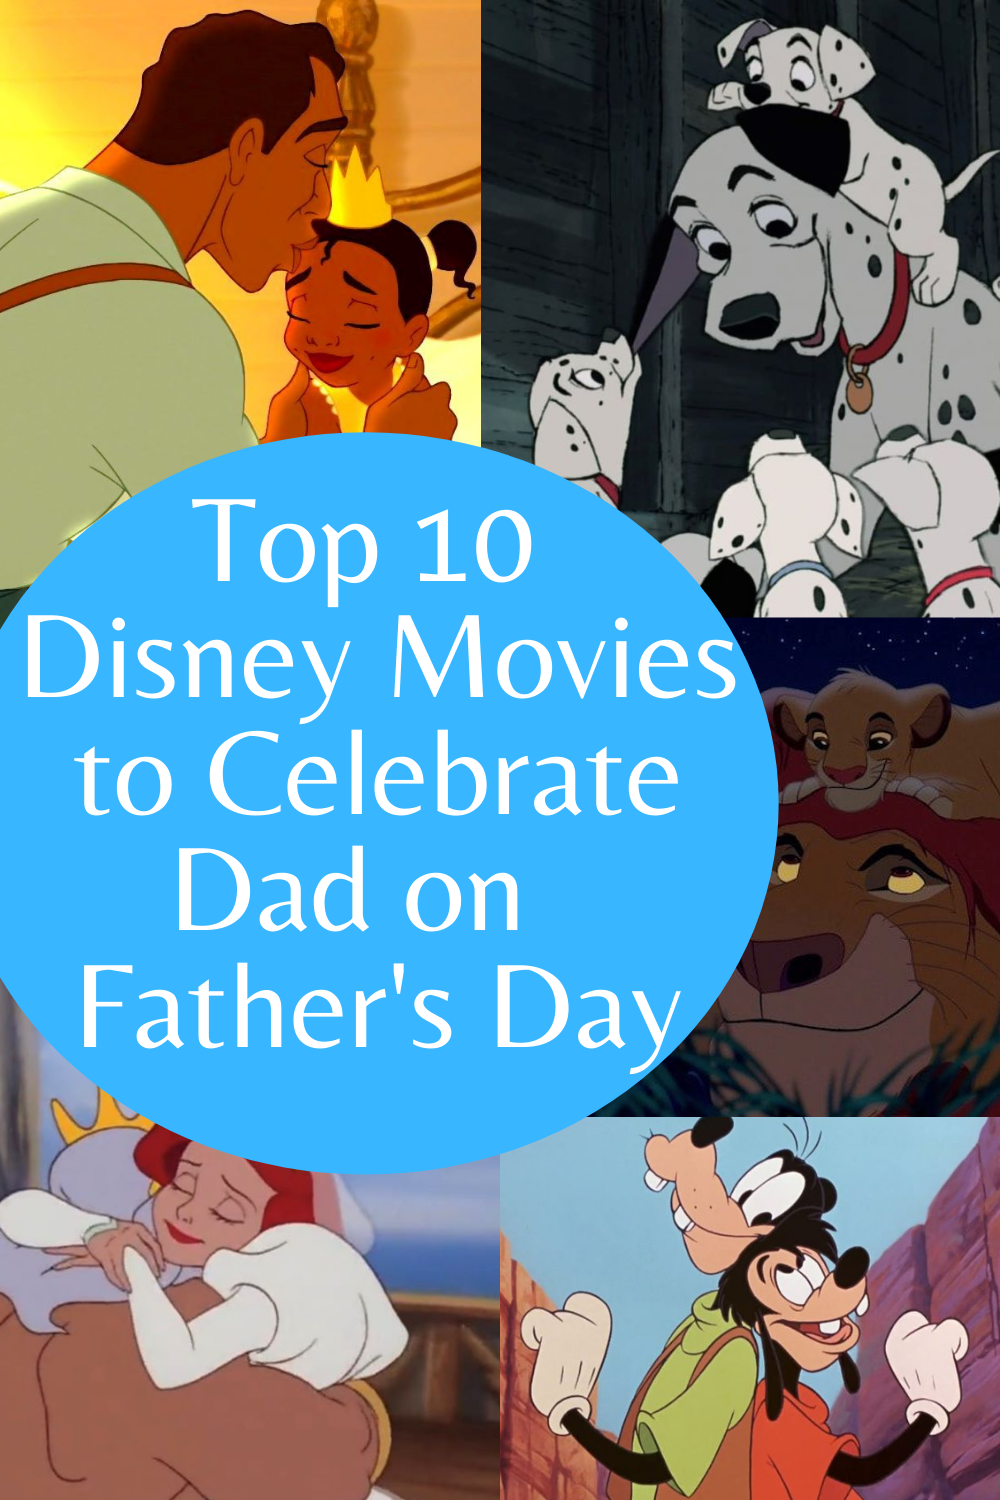 Top 10 Disney Movies to Celebrate Dad on Father's Day